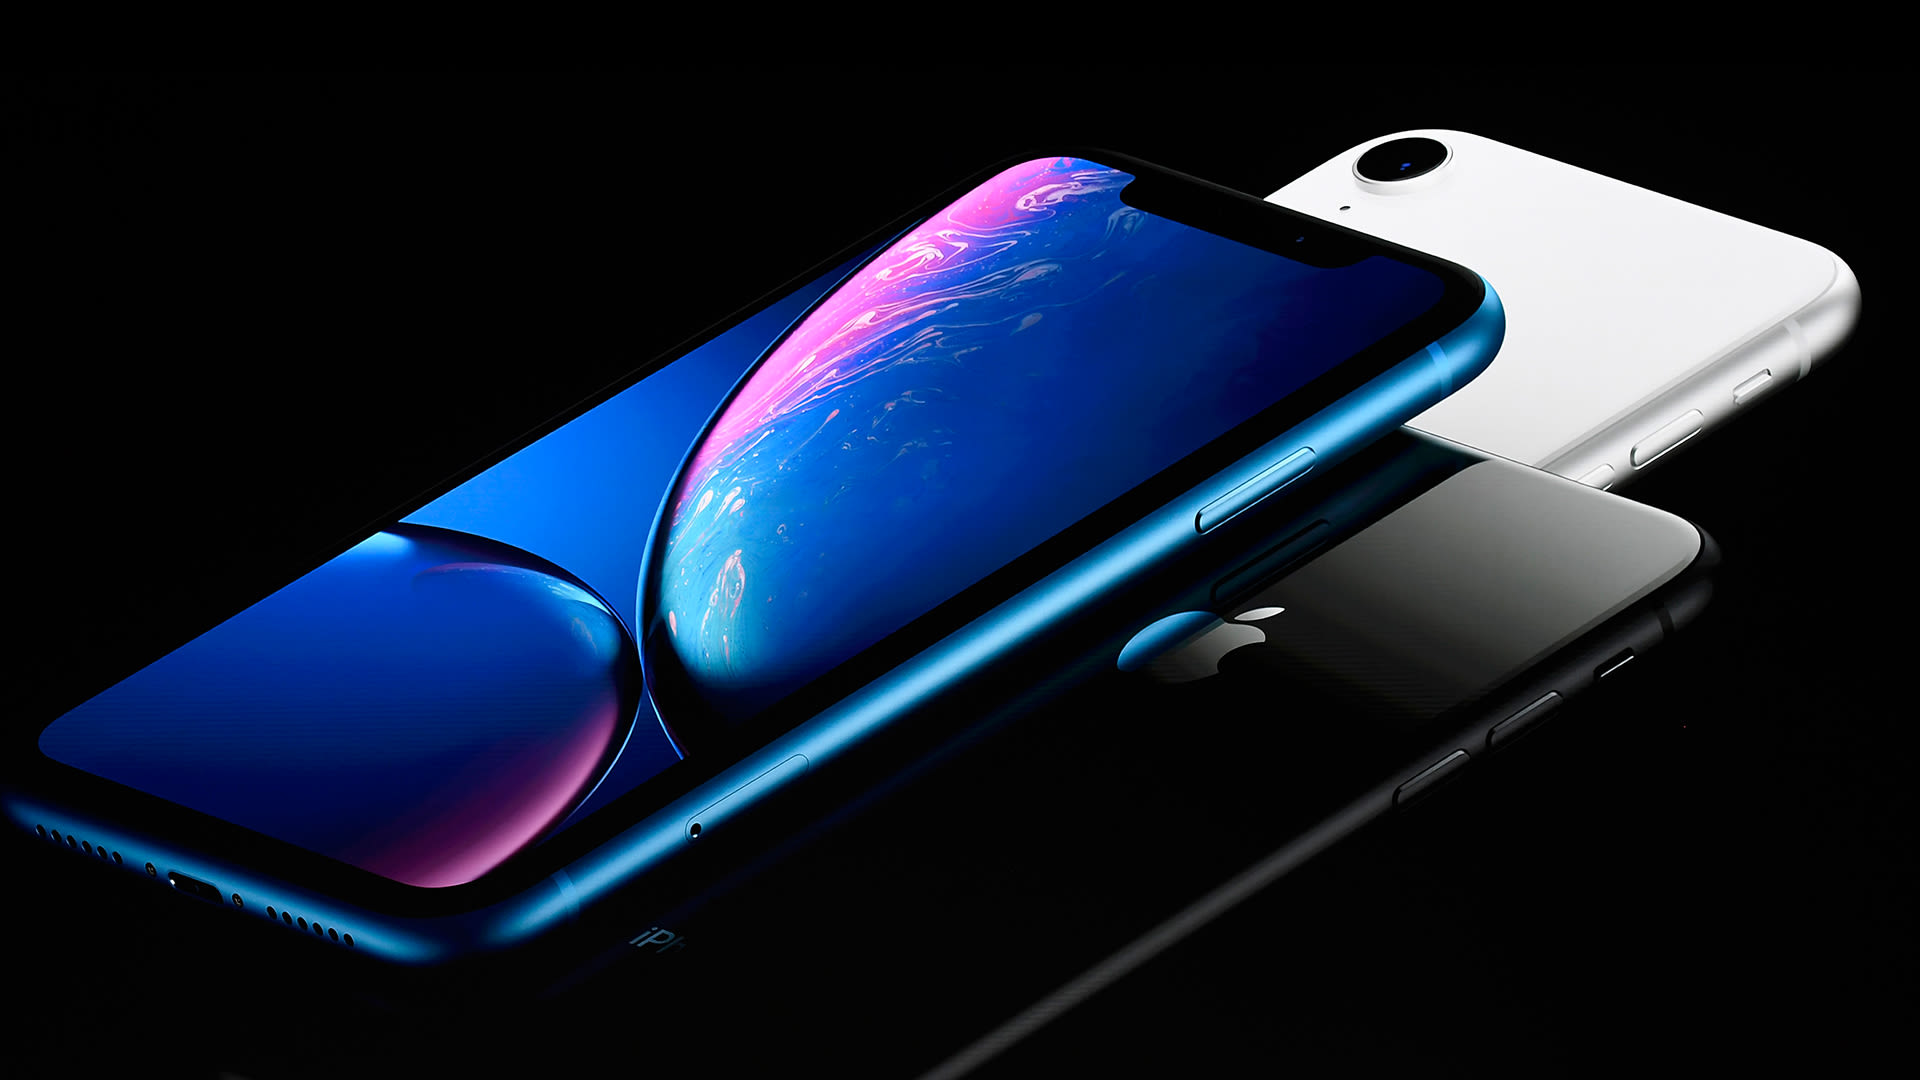 Apple iPhone Xs, Xs Max, Xr Photos: Dual-SIM iPhones with Super Retina HD  display are magnificent - Technology Gallery News